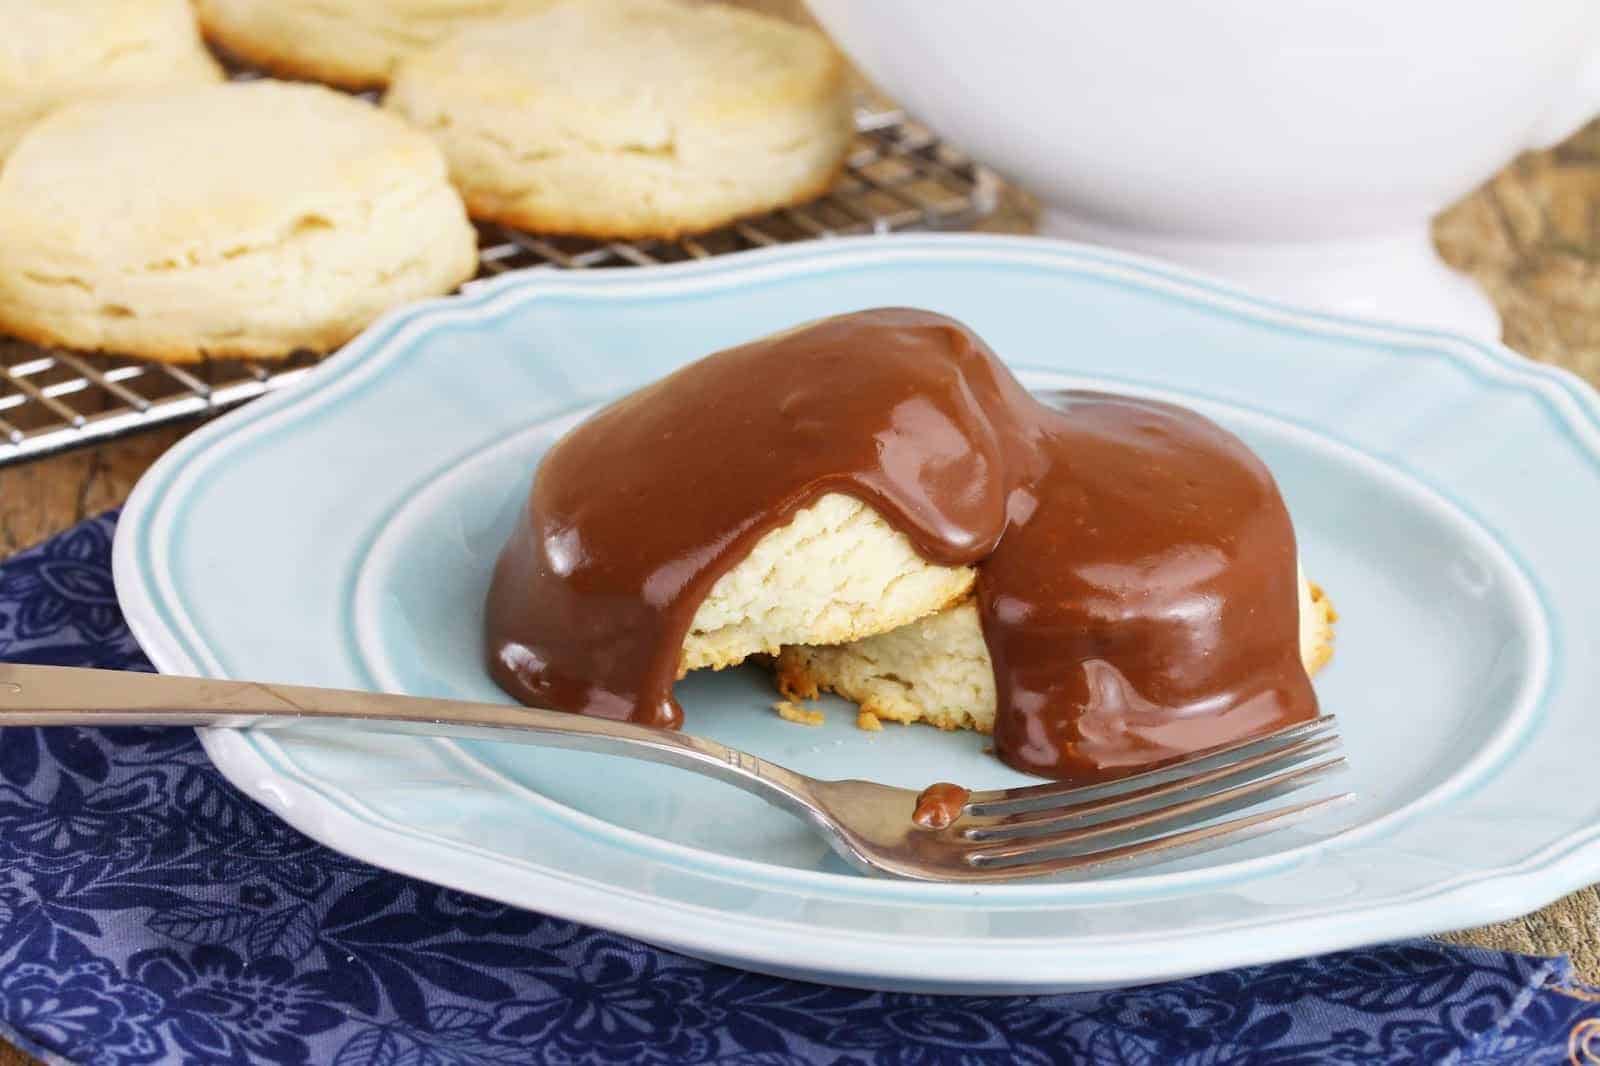 A couple of sweet biscuits on a plate, drizzled with chocolate gravy